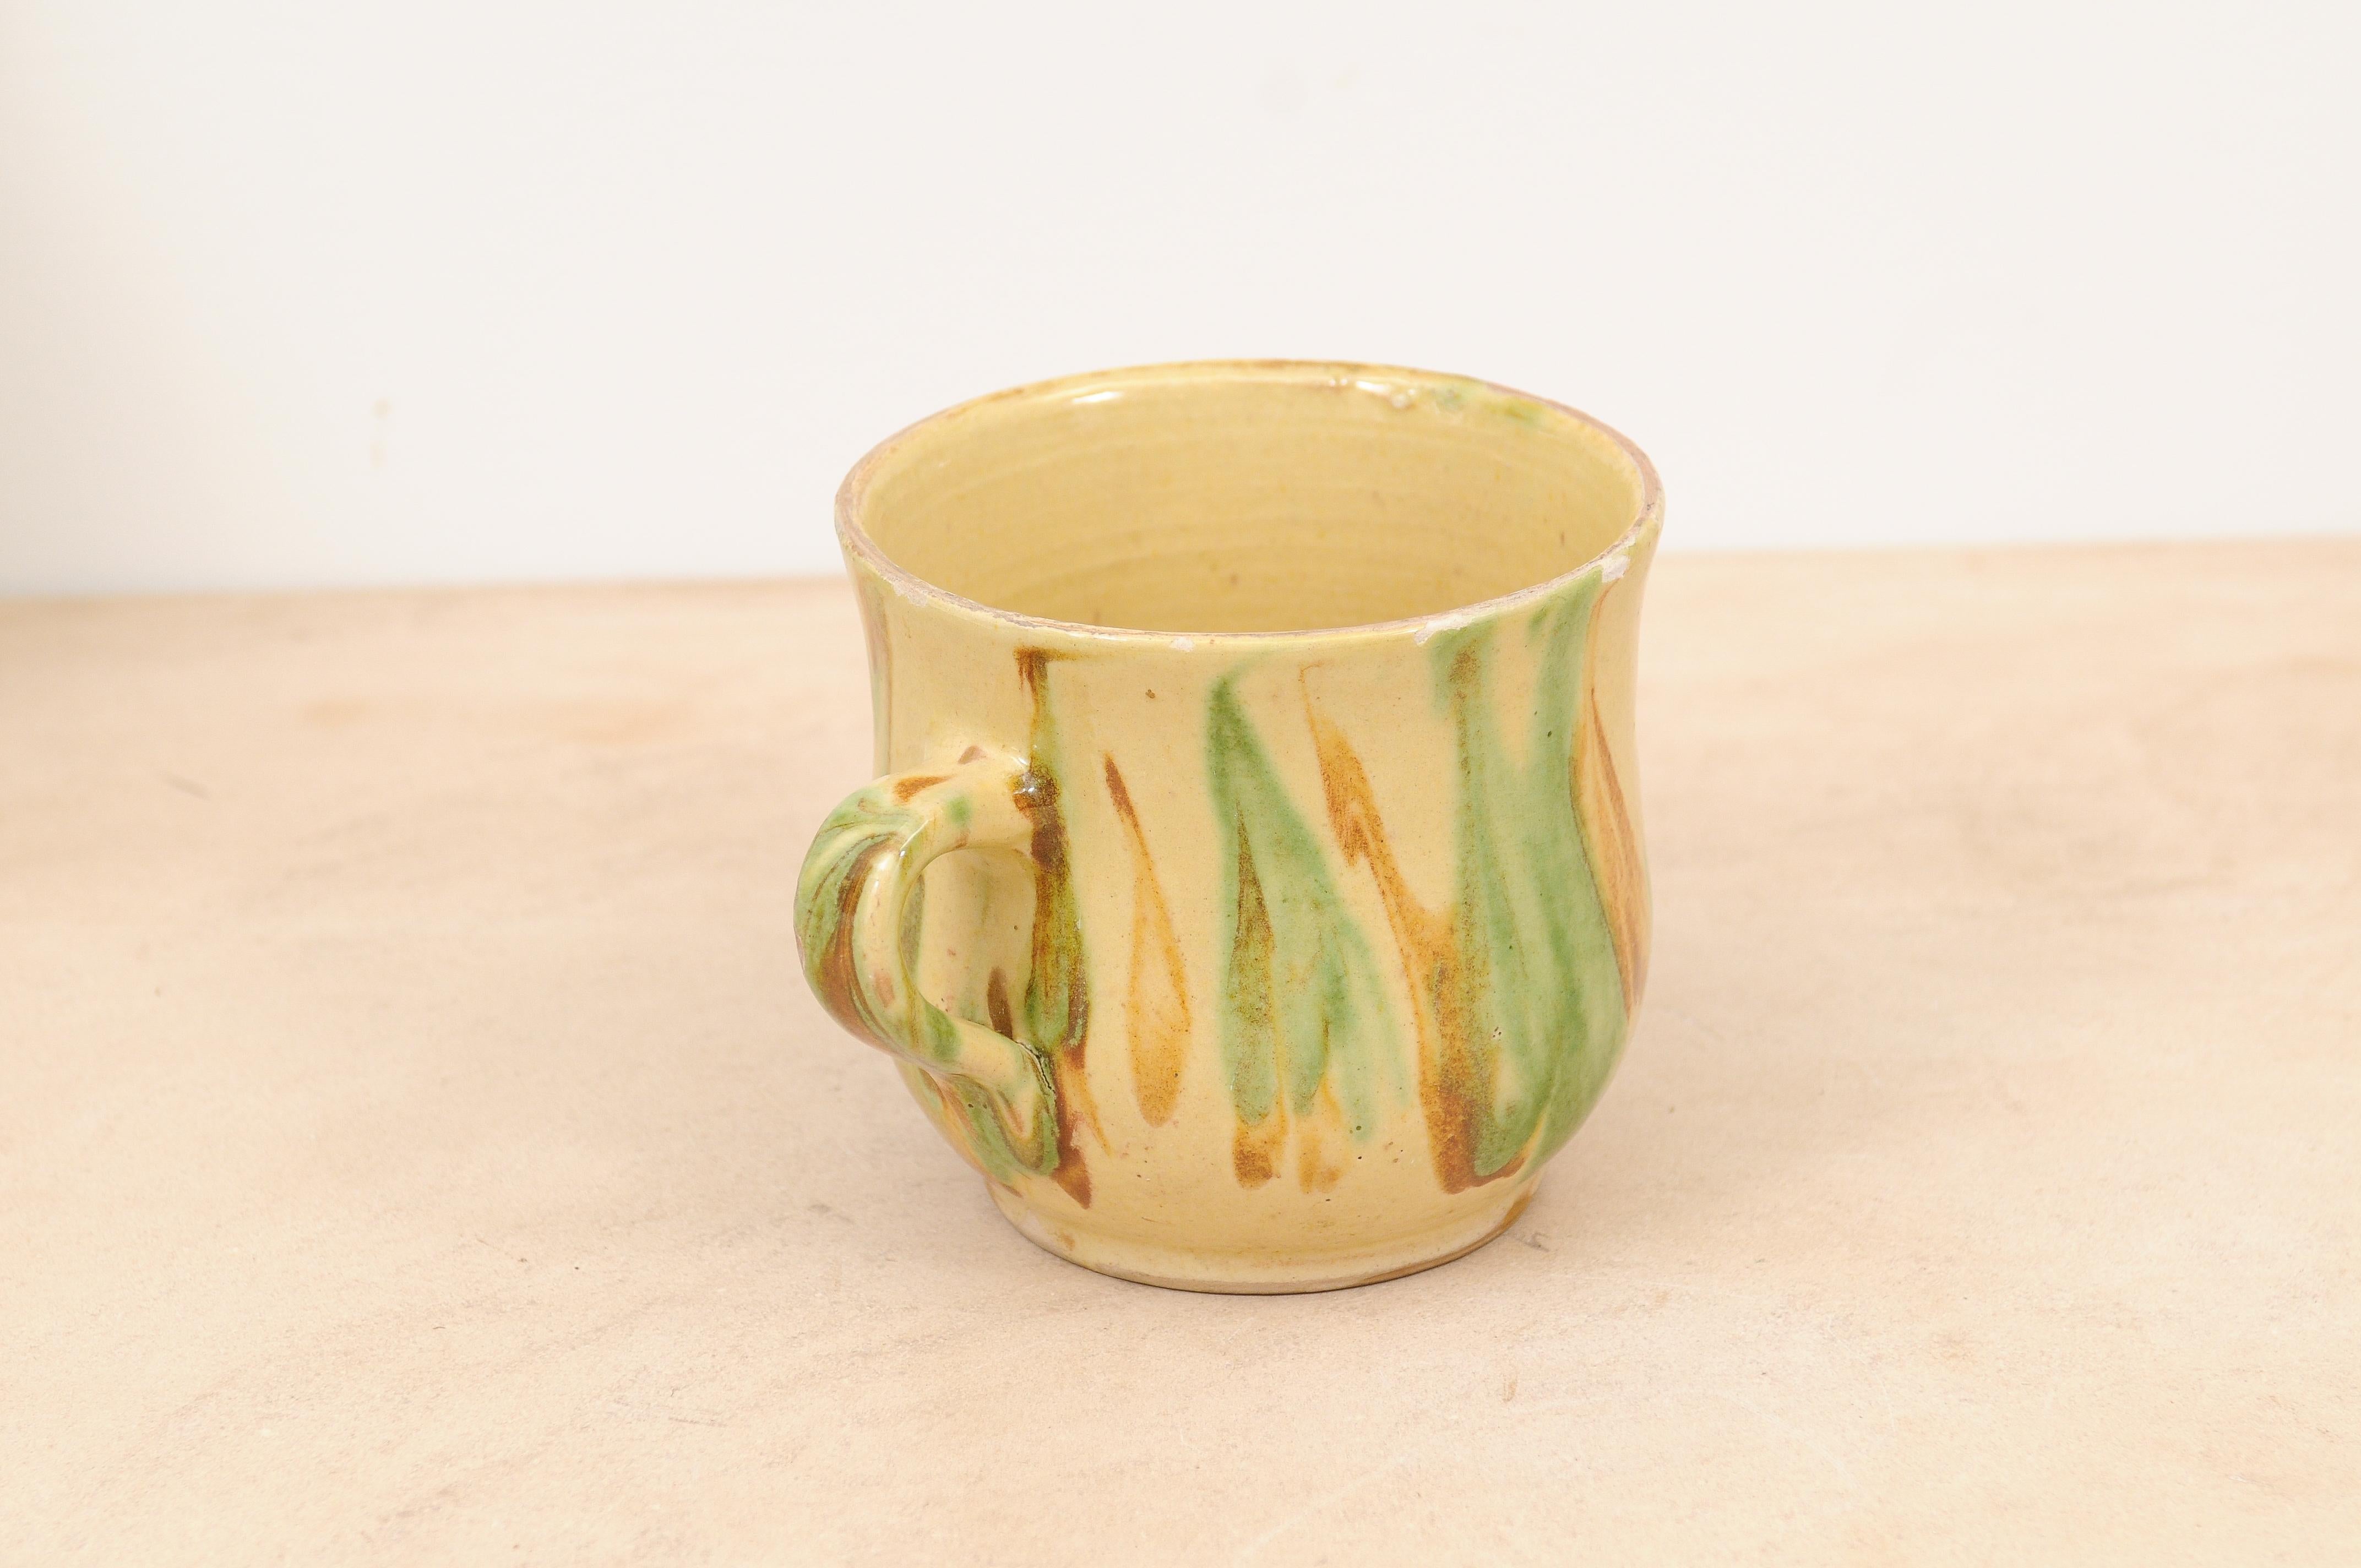 Rustic French 19th Century Pottery Mug with Yellow, Green and Rust Glaze In Good Condition For Sale In Atlanta, GA